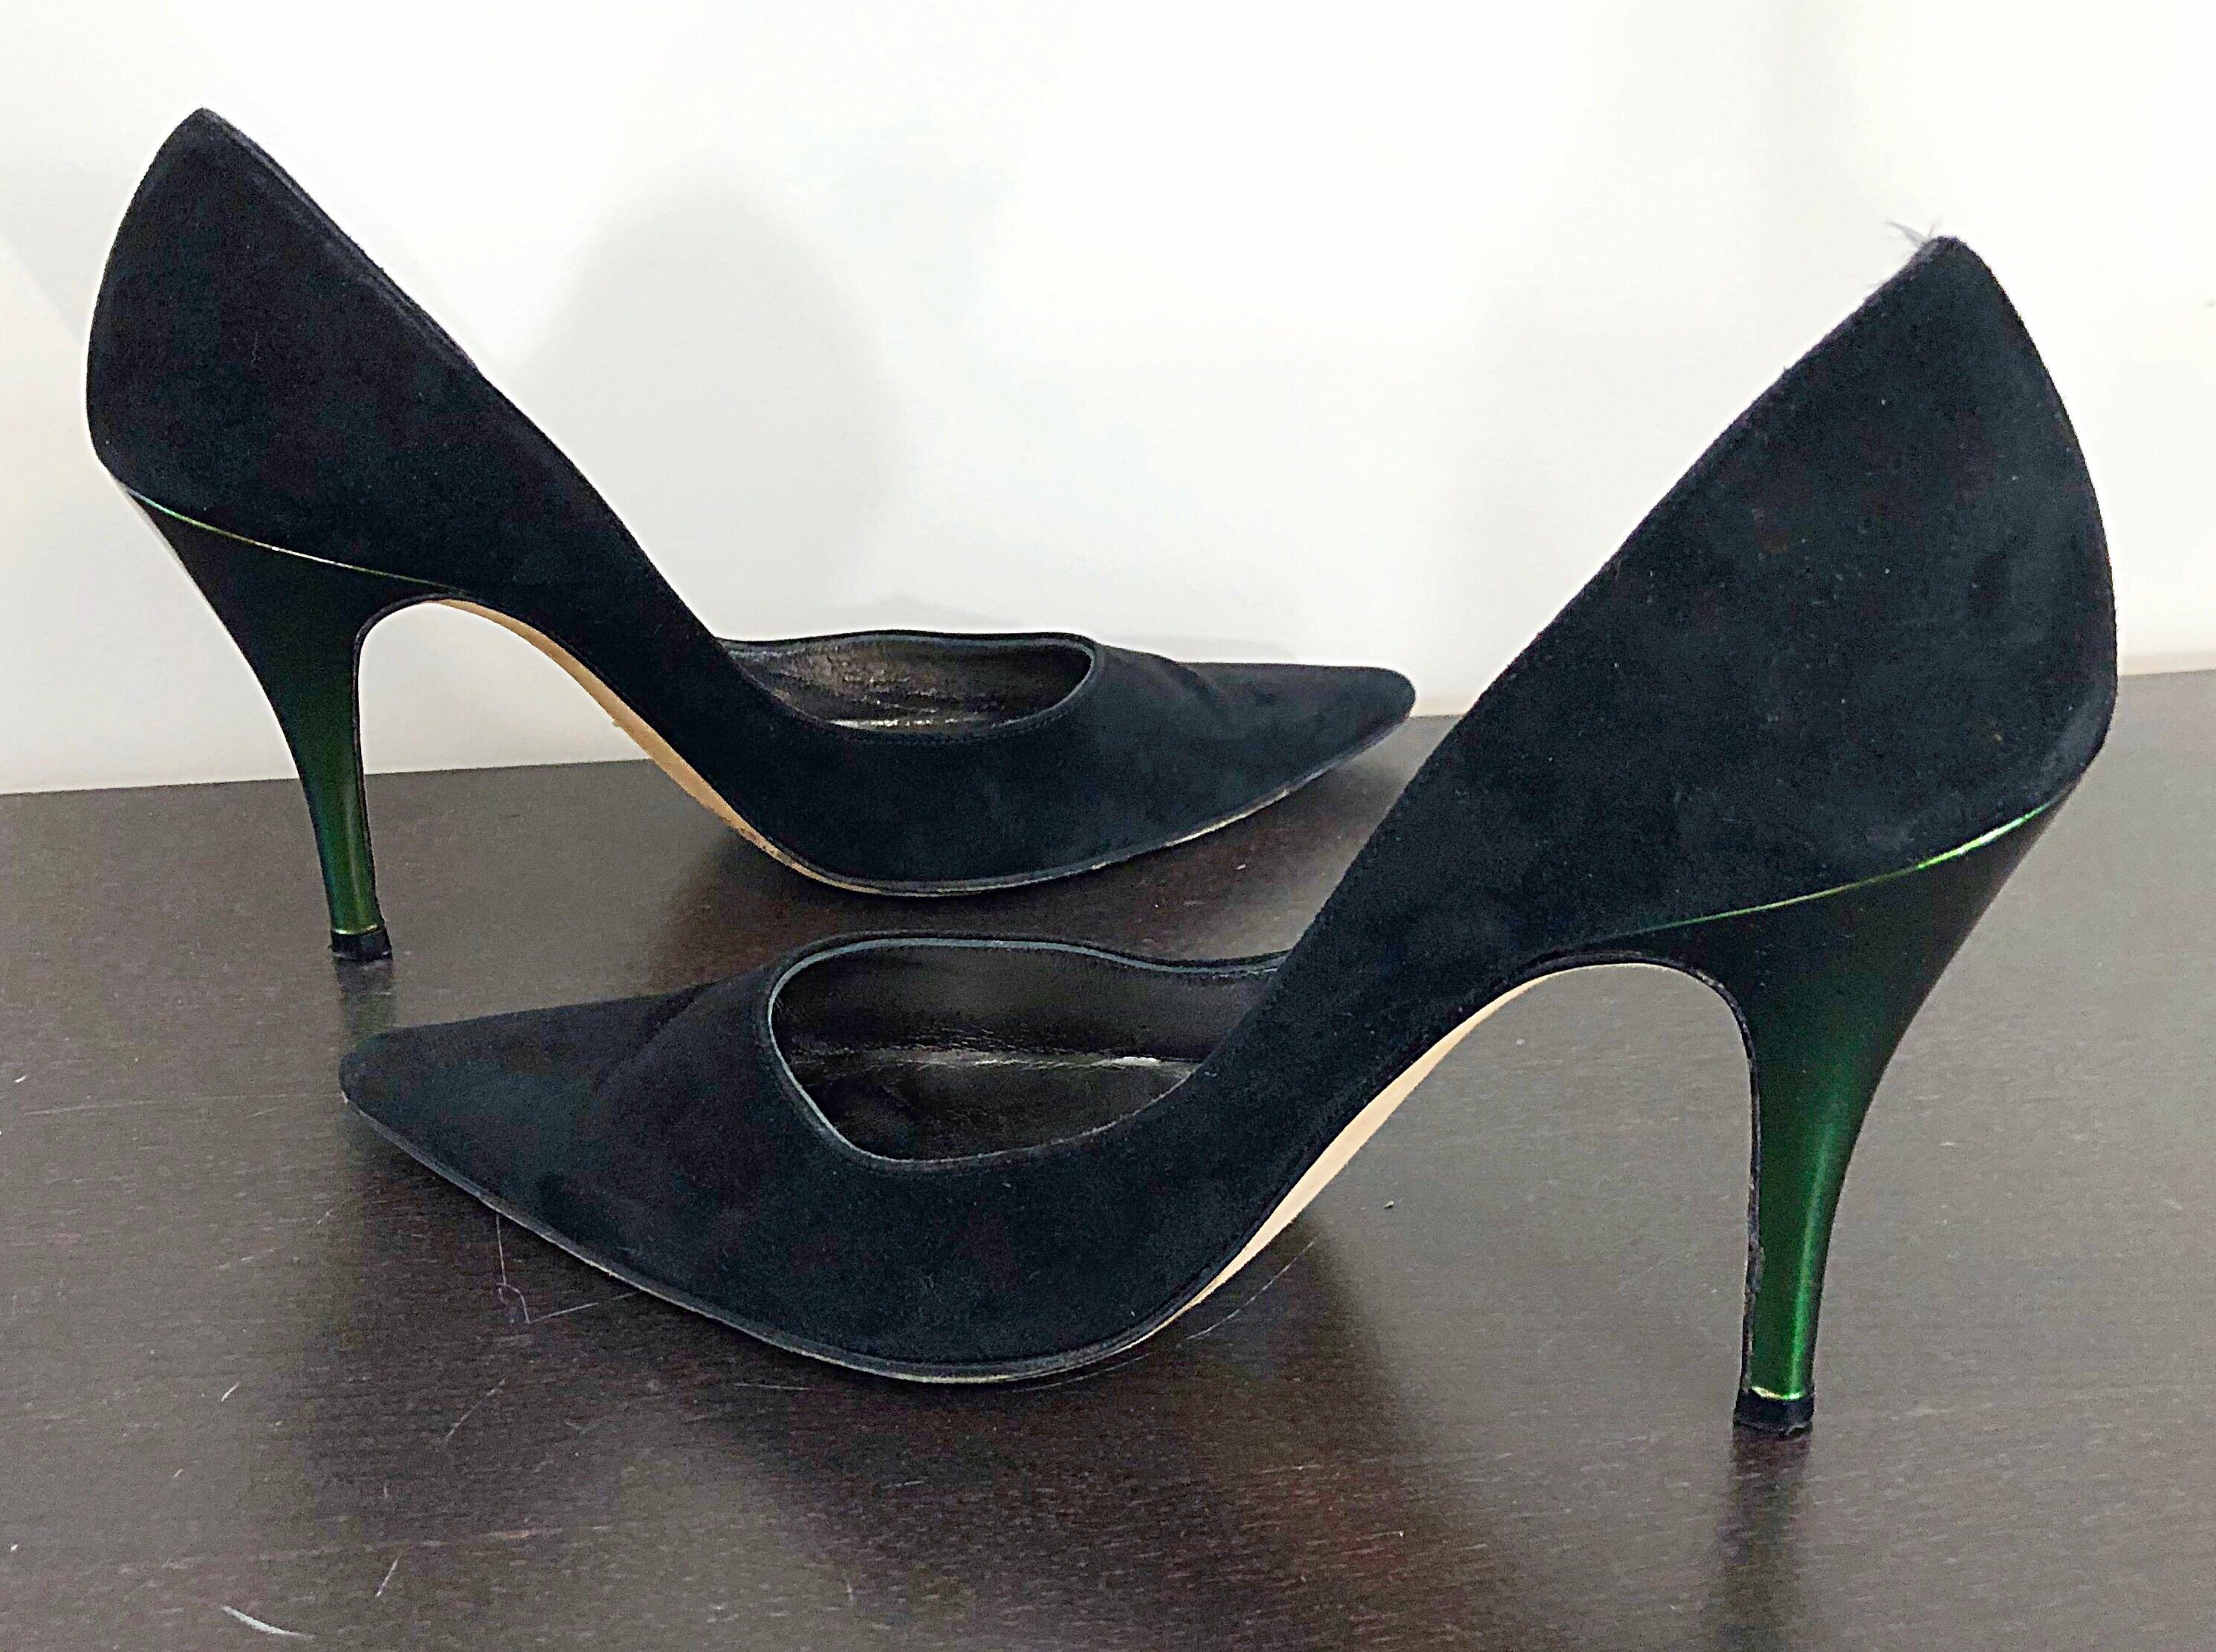 Sexy vintage late 90s CHRISTIAN LACROIX black suede leather and green metallic high heel pointy toe shoes! Sleek design, with cutting edge design. Metallic iridescent green heel. The perfect black heel with just the right amount of pop! Great with